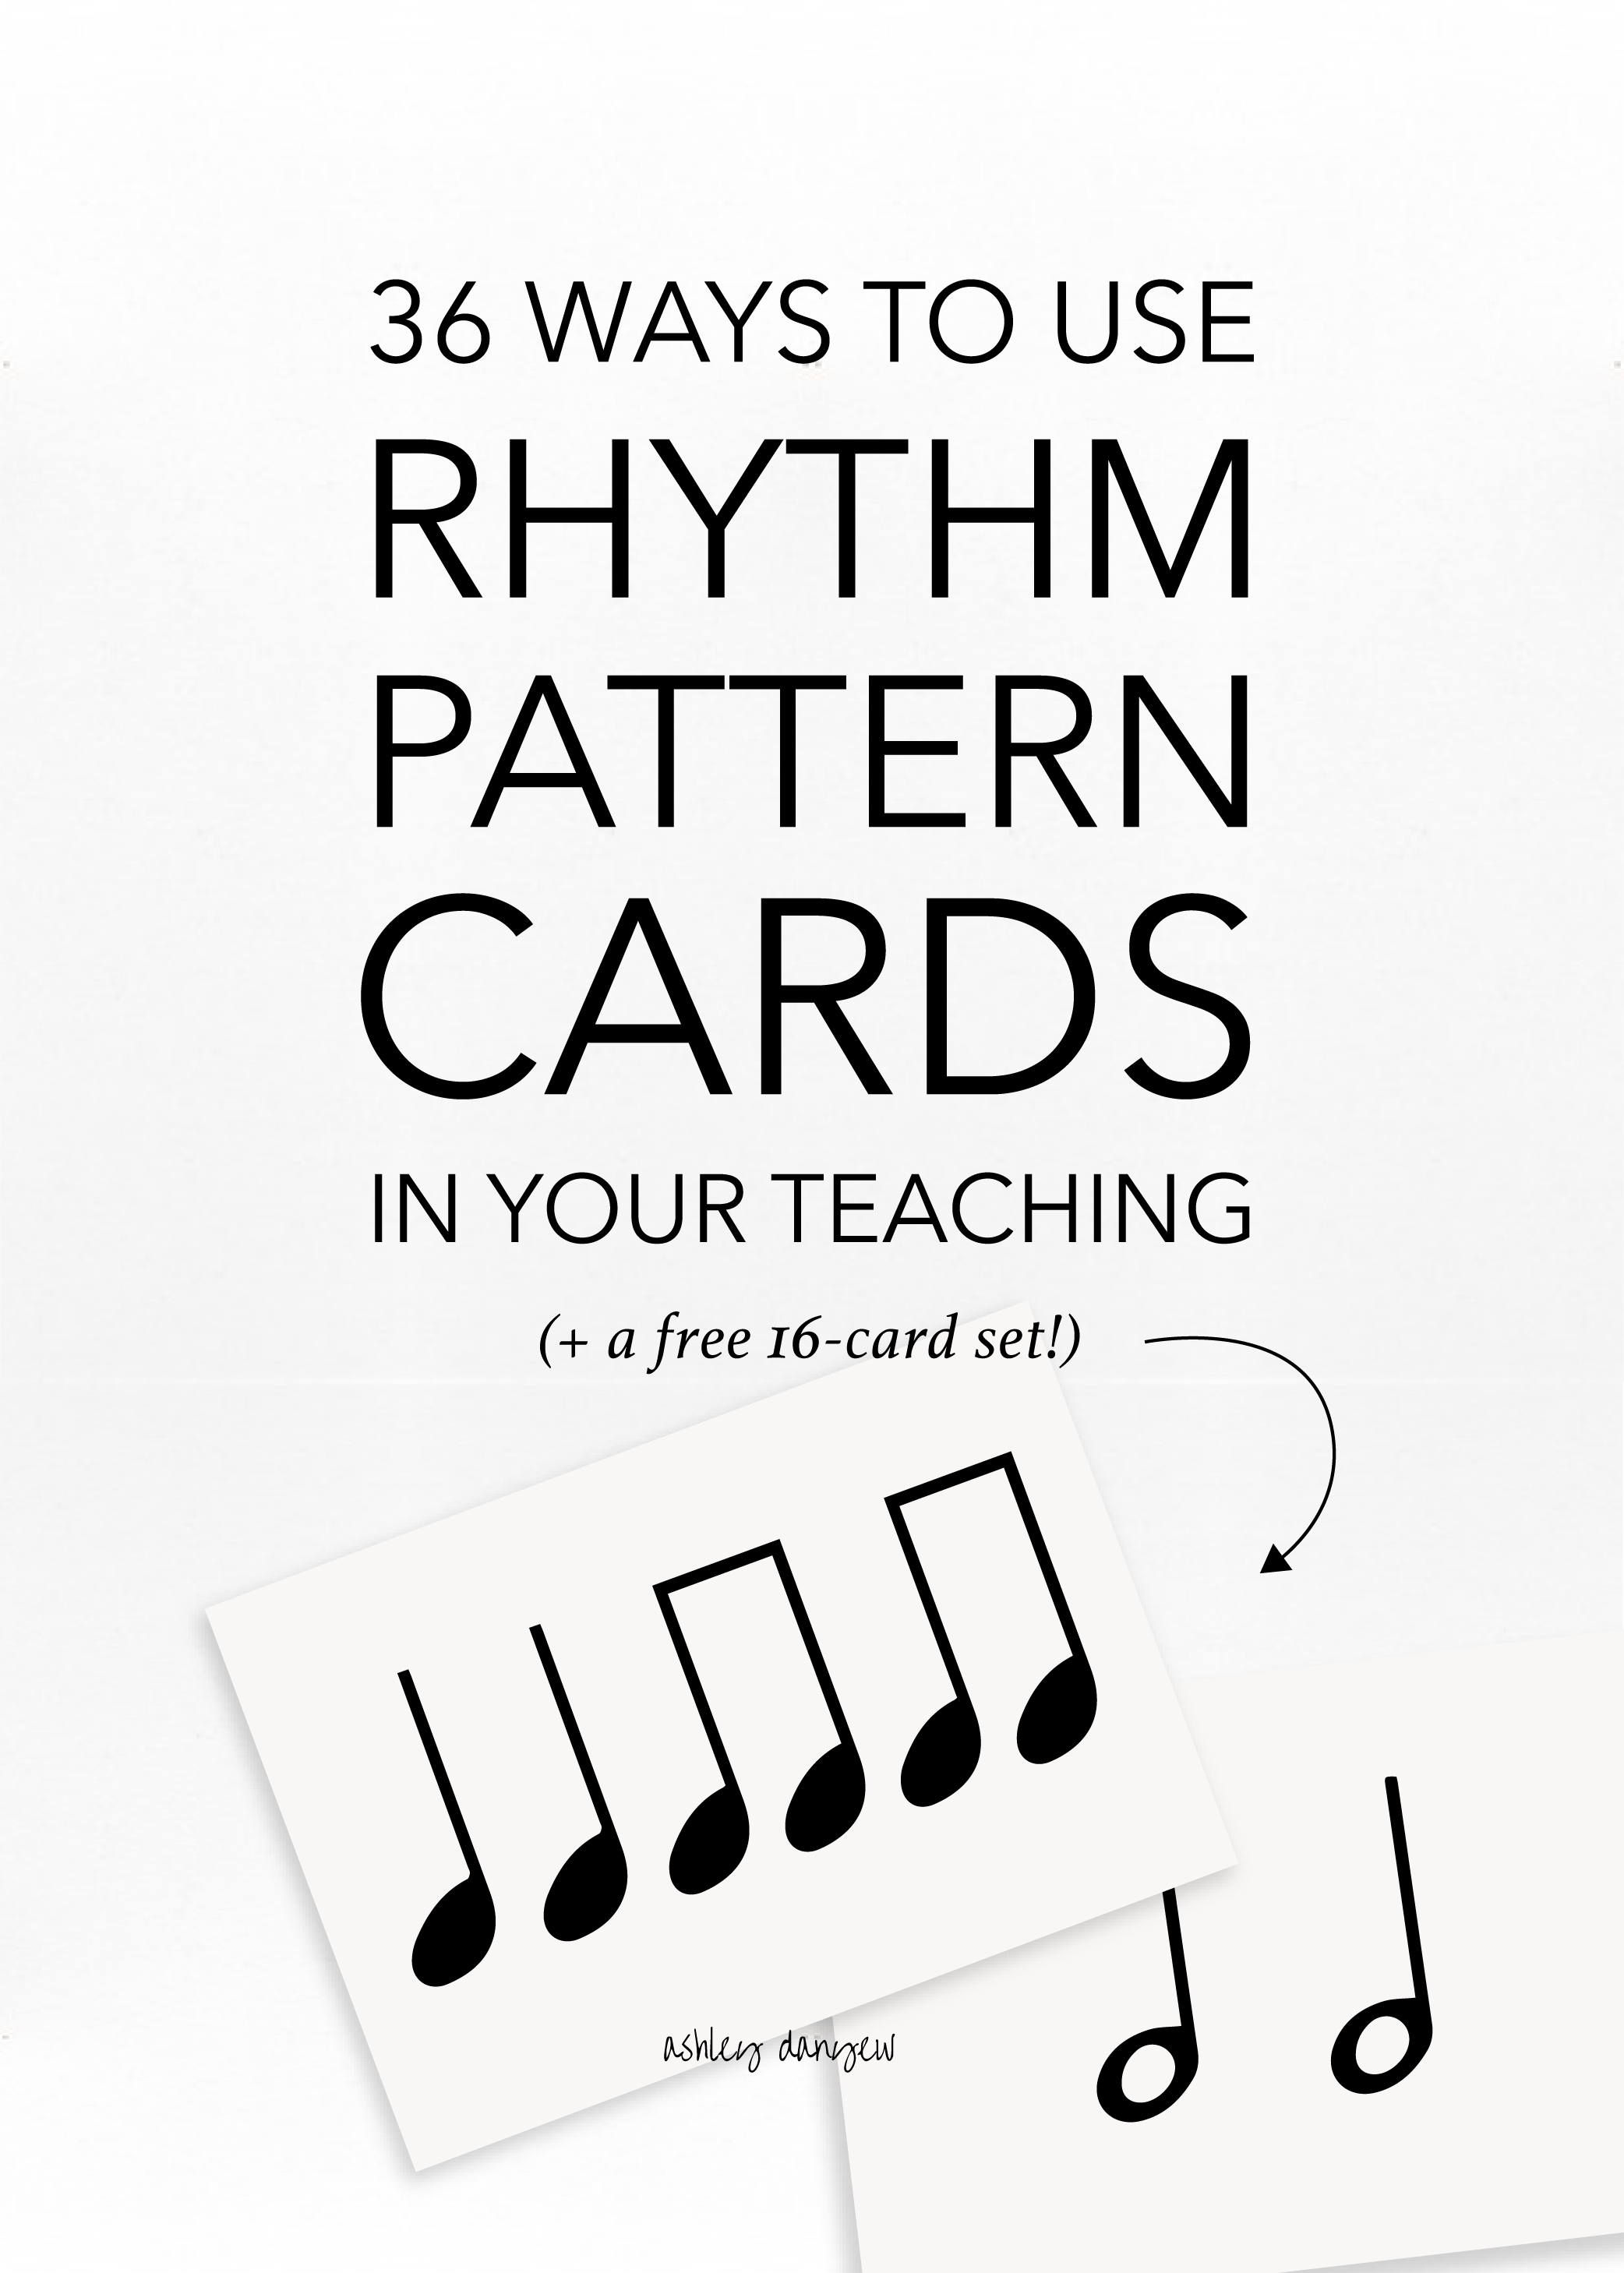 36 Ways to Use Rhythm Pattern Cards in Your Teaching